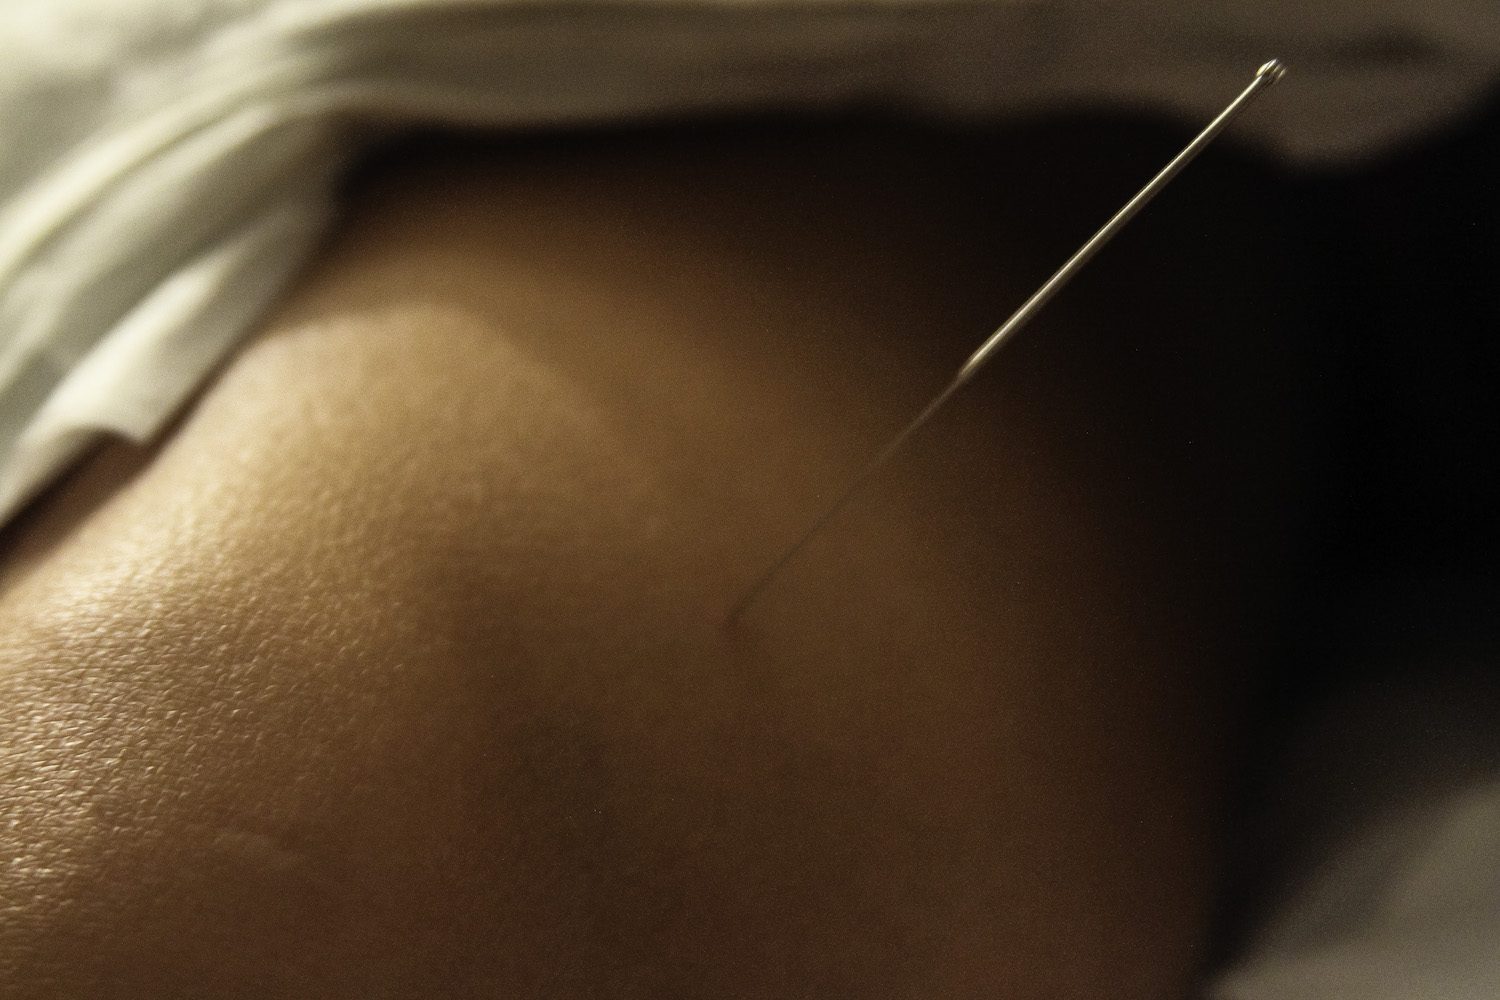 Acupuncture needle. © H. Lan Thao Lam, 2017.